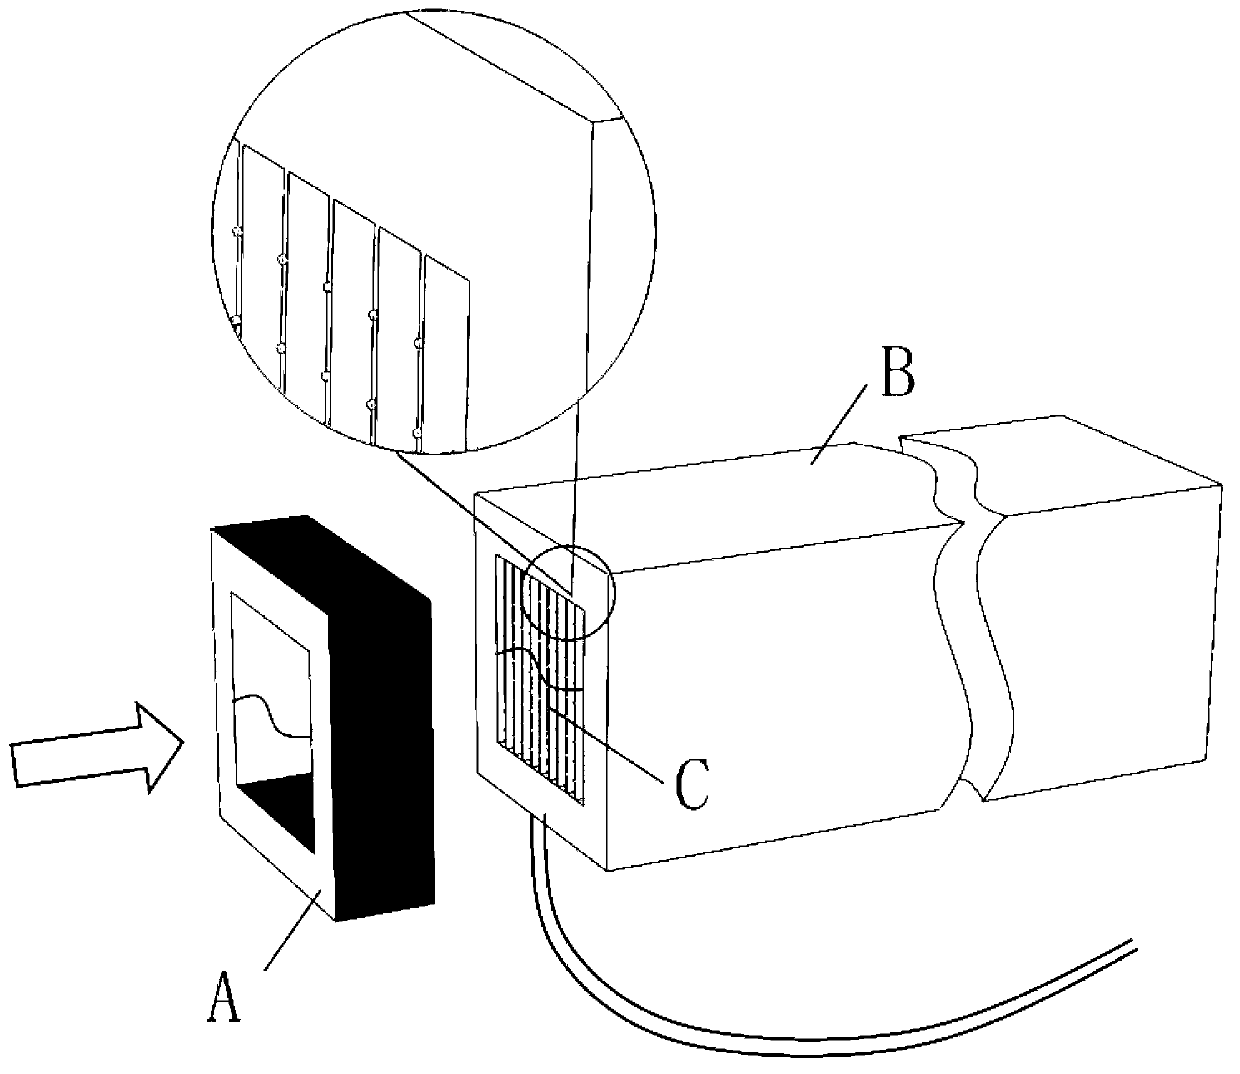 Two-phase flow tomography system based on array-type monopole conducting probe